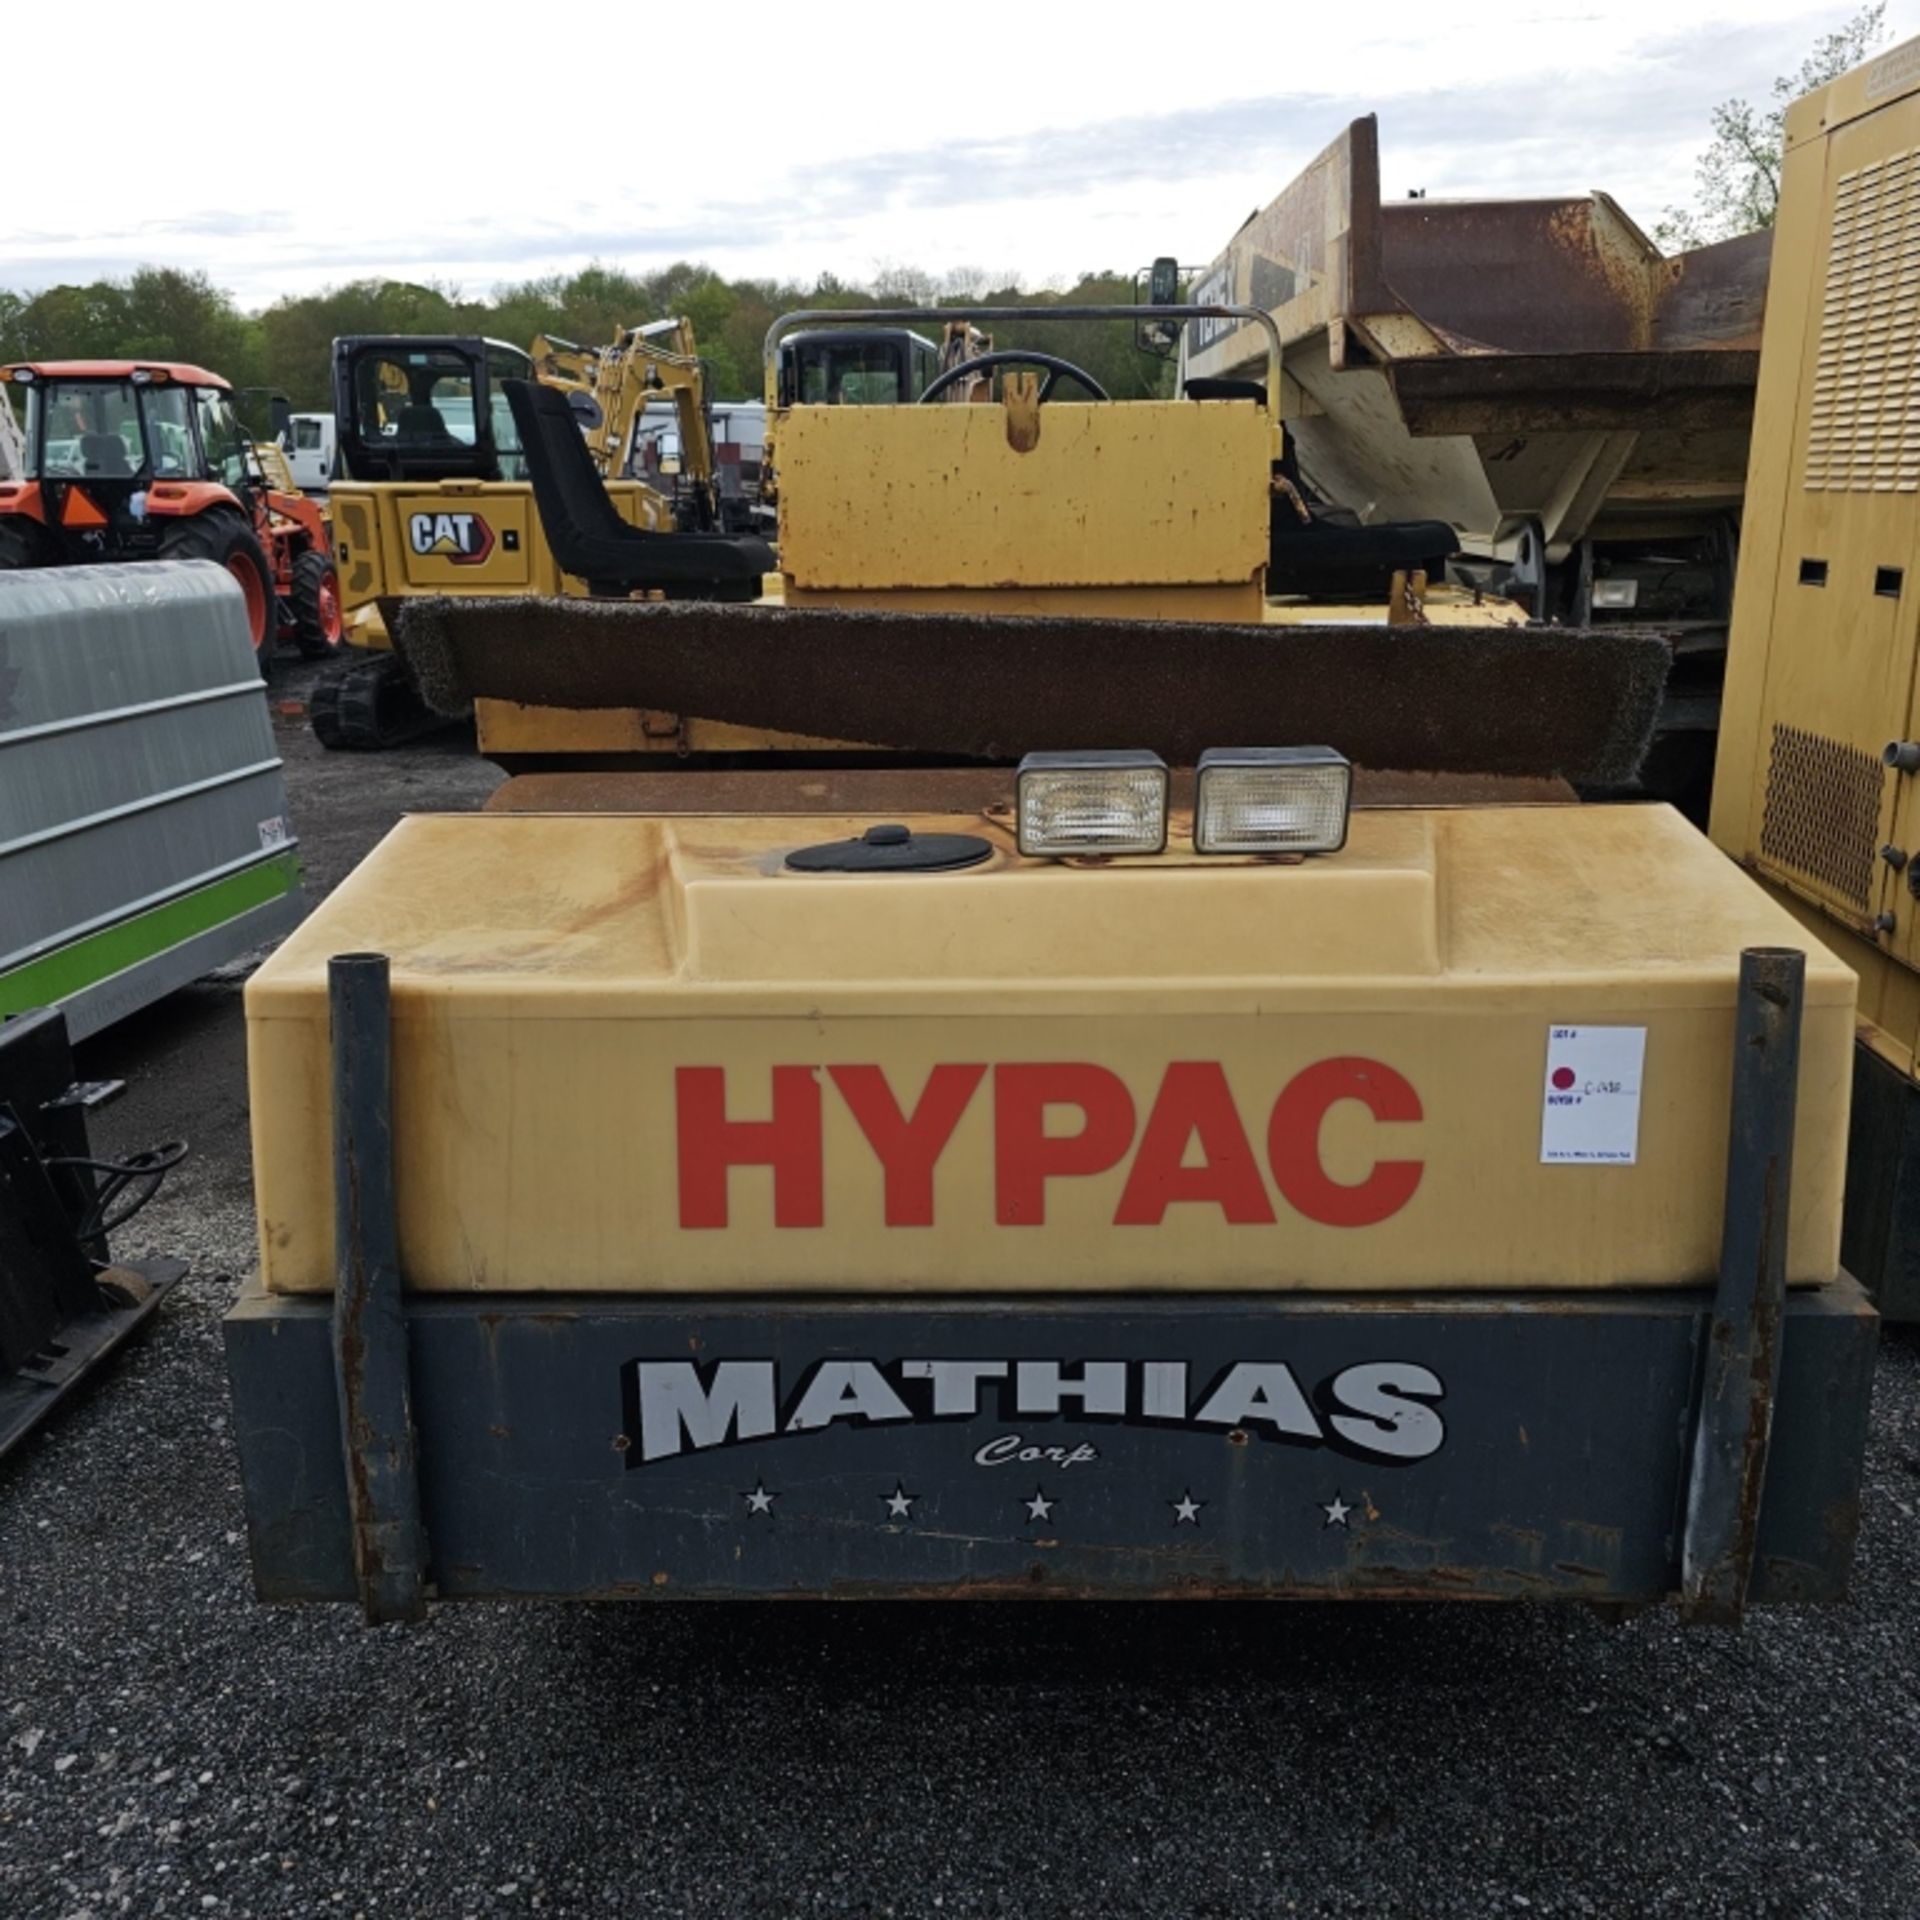 Hypac c766b roller - Image 2 of 4